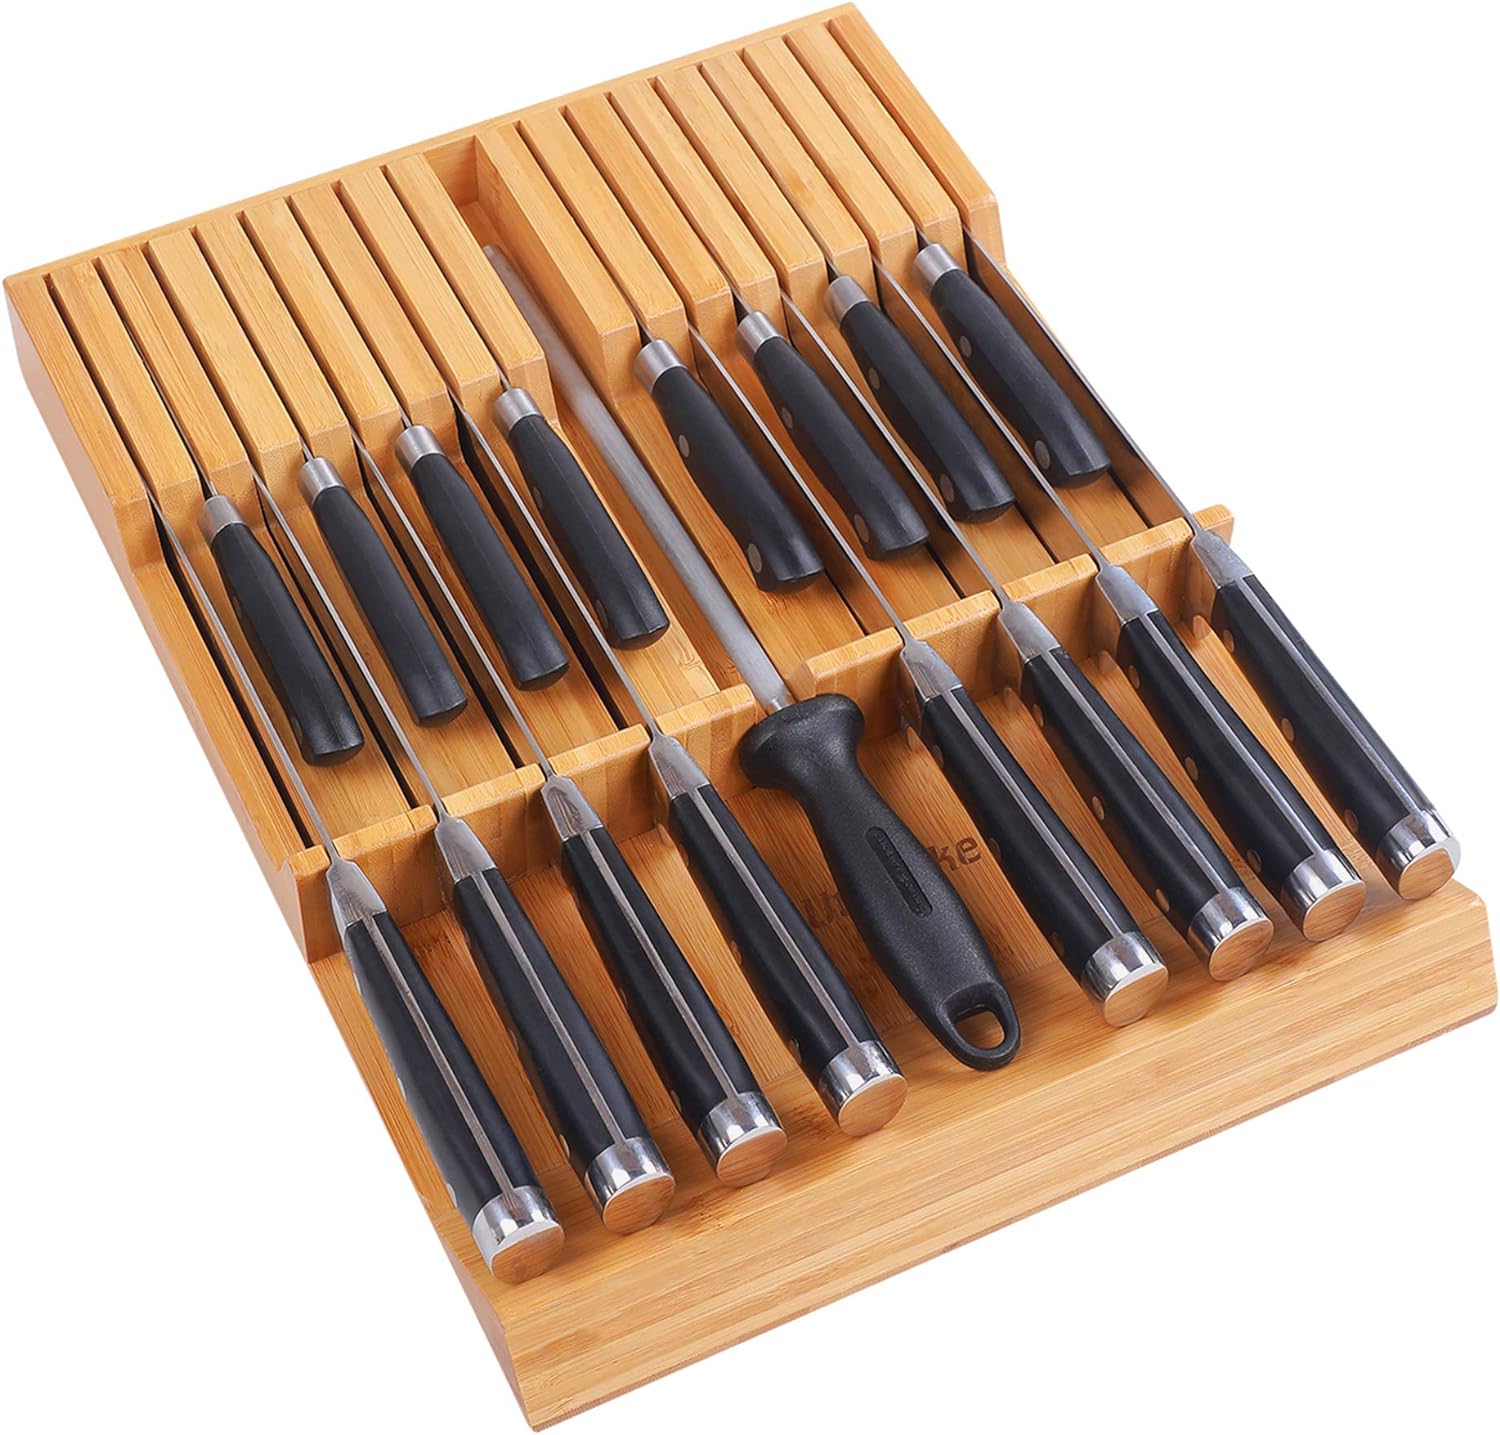 This knife block is great. It fits well in any size drawer. Not too tall. Our knives are well-organized now. No problem getting the knives in the slots. Hold lots of knives. It' looks really nice. The price is well worth it.